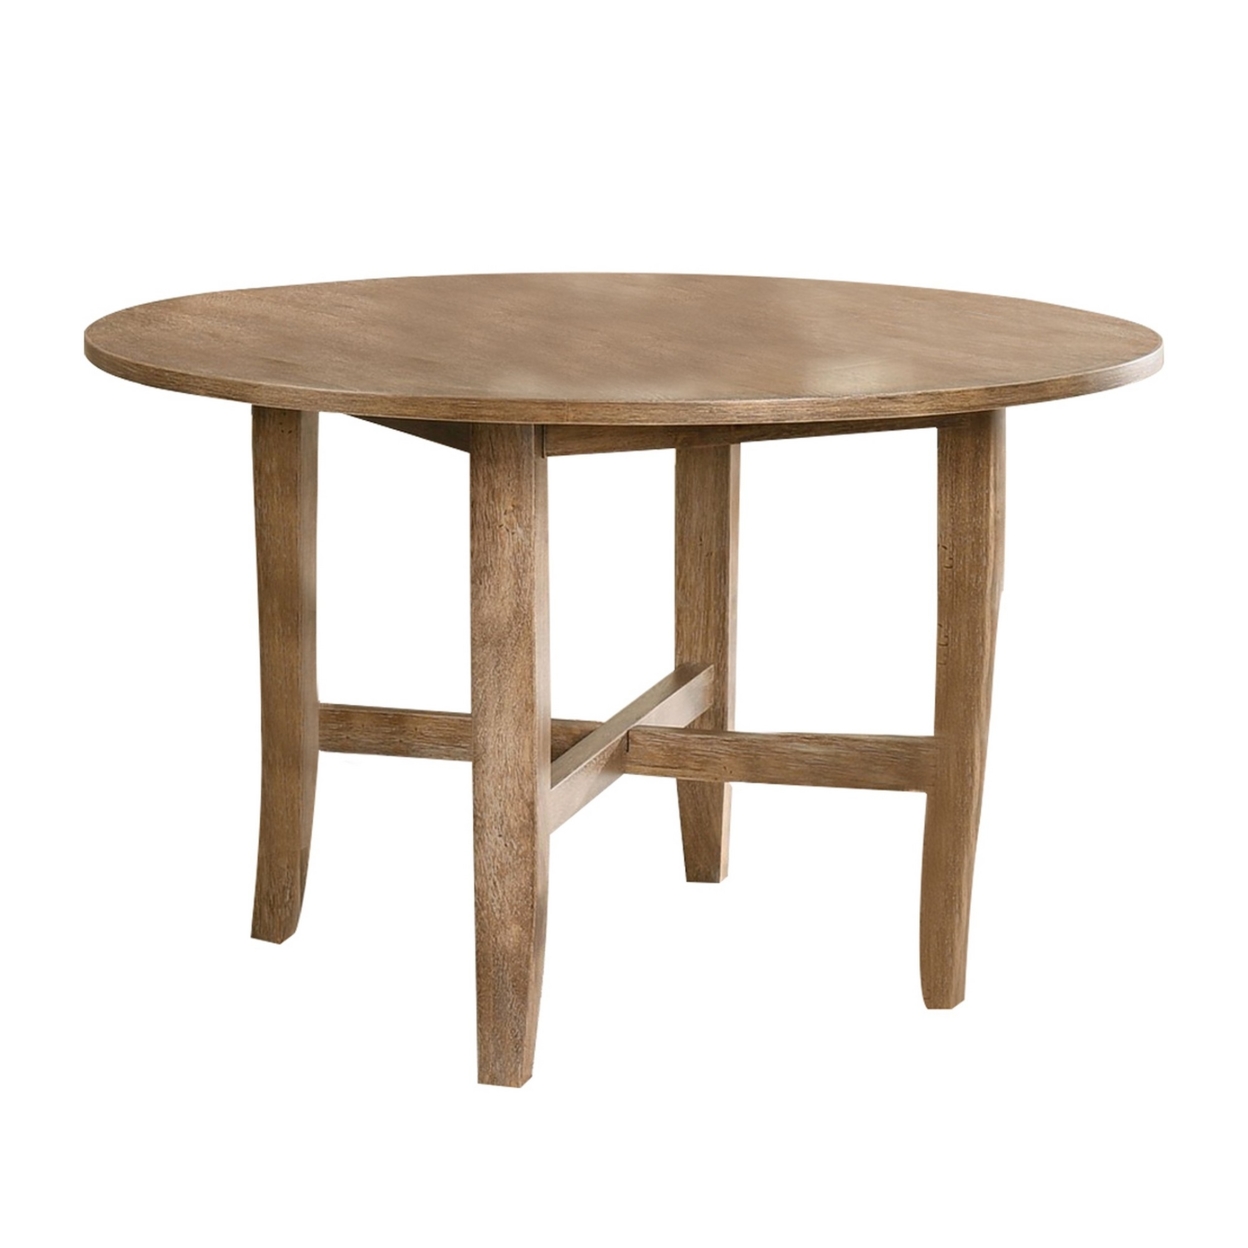 47 Inch Farmhouse Style Round Wooden Dining Table, Rustic Brown- Saltoro Sherpi